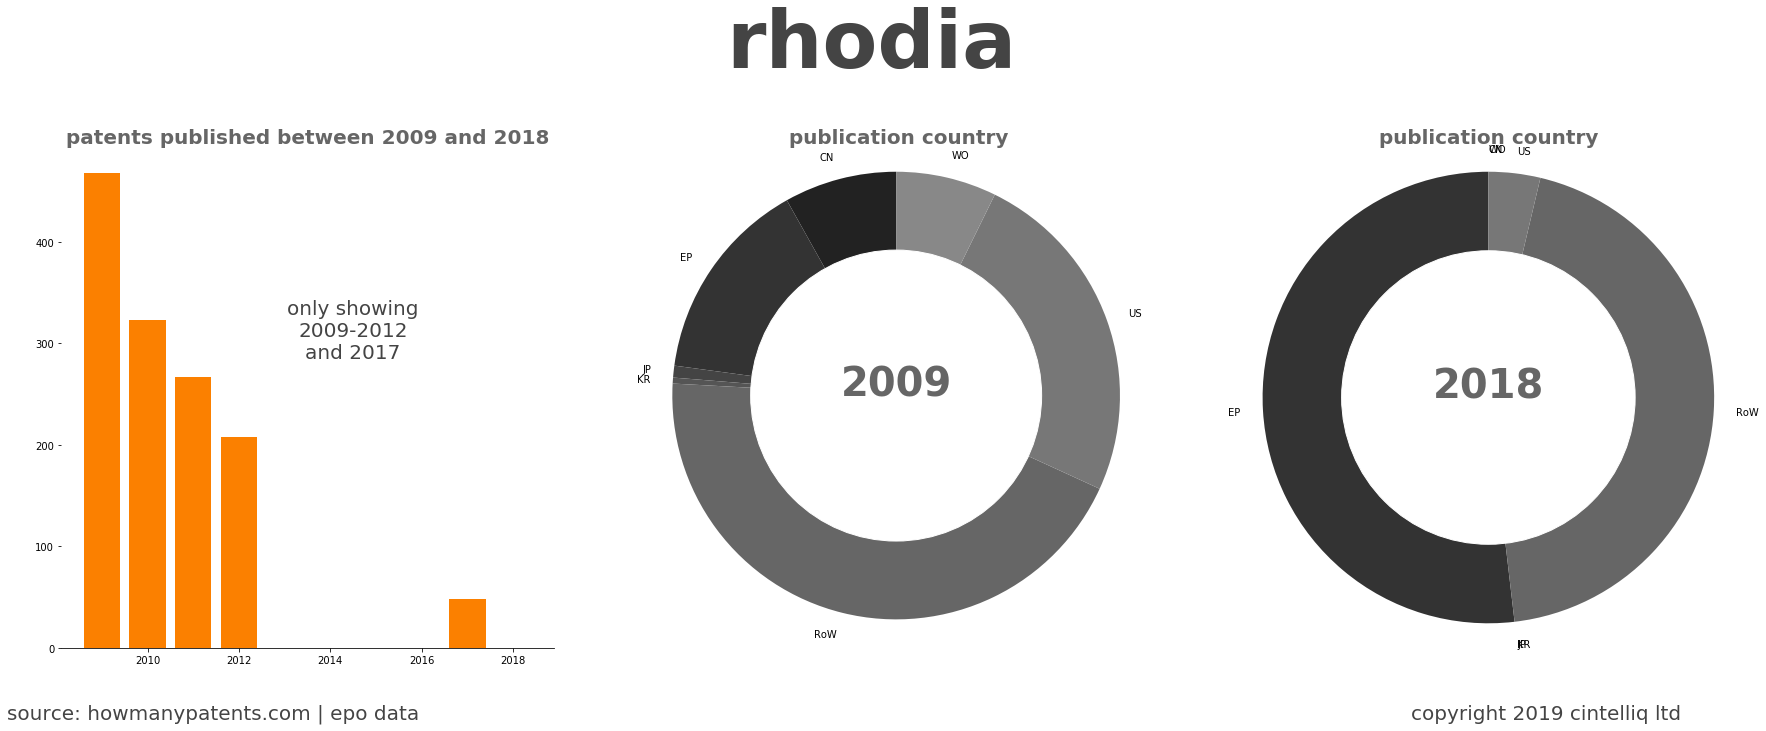 summary of patents for Rhodia